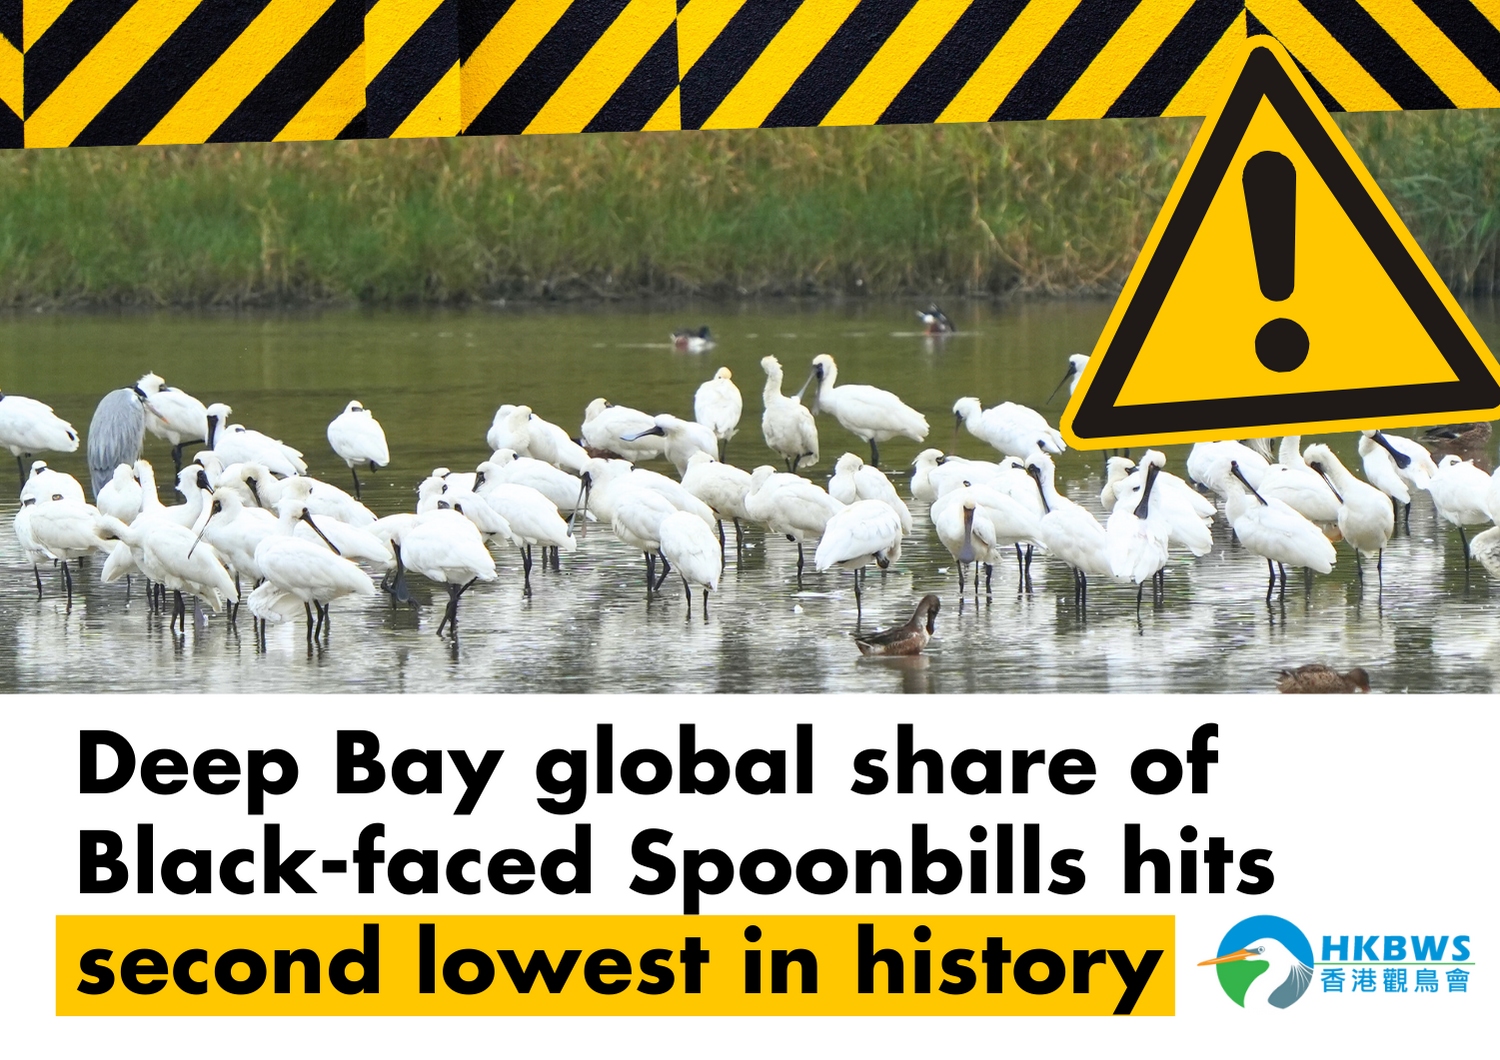 Black-faced Spoonbill global population stabilizes while Deep Bay proportion hits second lowest in history